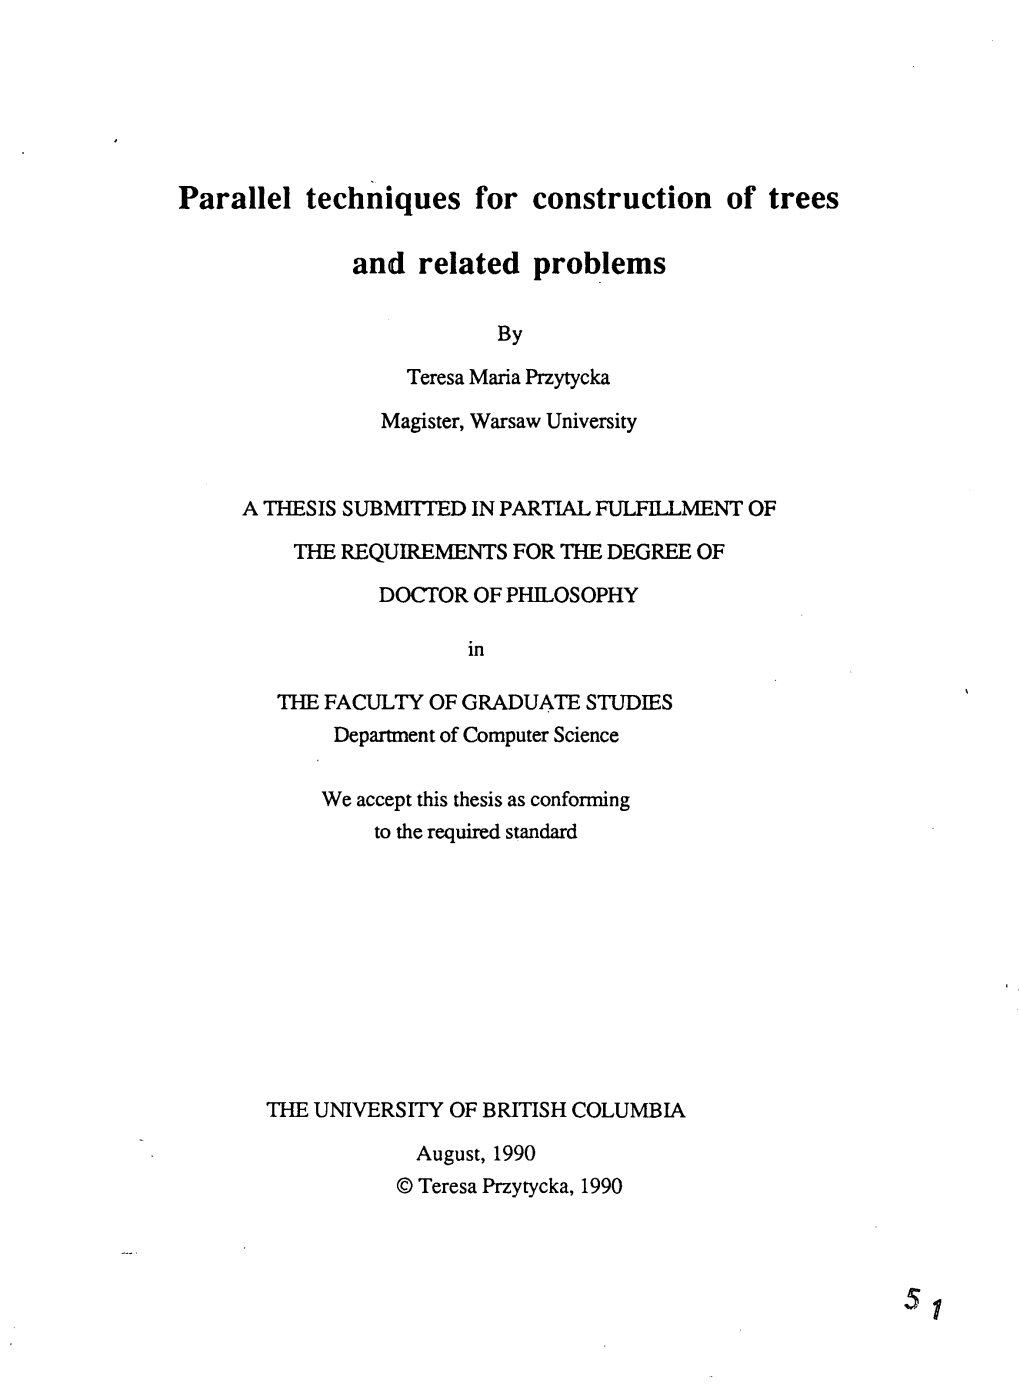 Parallel Techniques for Construction of Trees and Related Problems